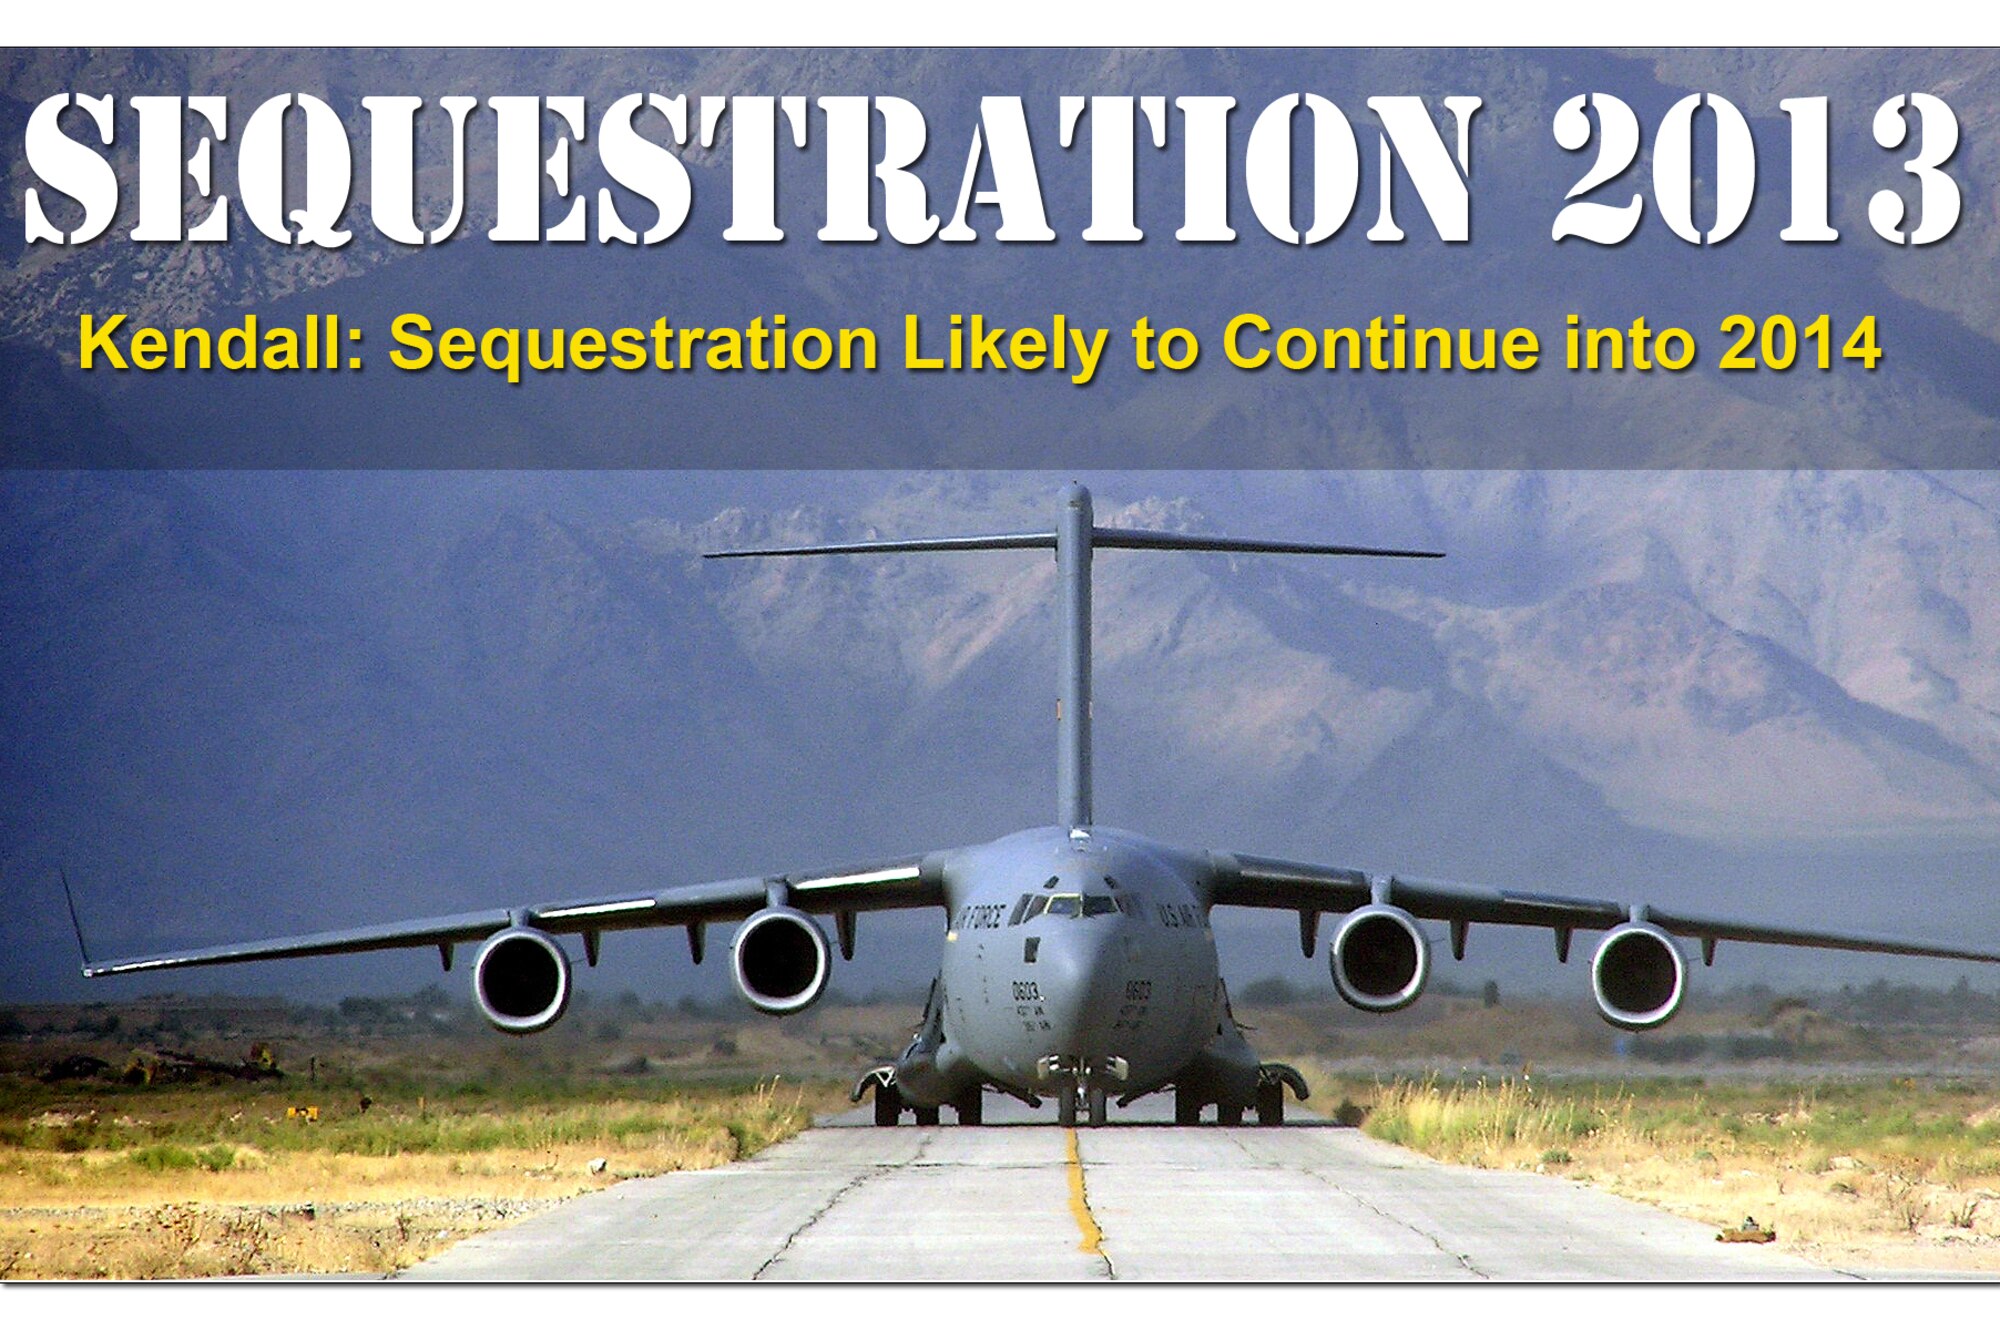 WASHINGTON, June 3, 2013 – Sequestration spending cuts could continue into 2014, and the impact of the deep cuts will fall disproportionately on small business, the Pentagon’s top acquisition official told a Navy industry forum today.

